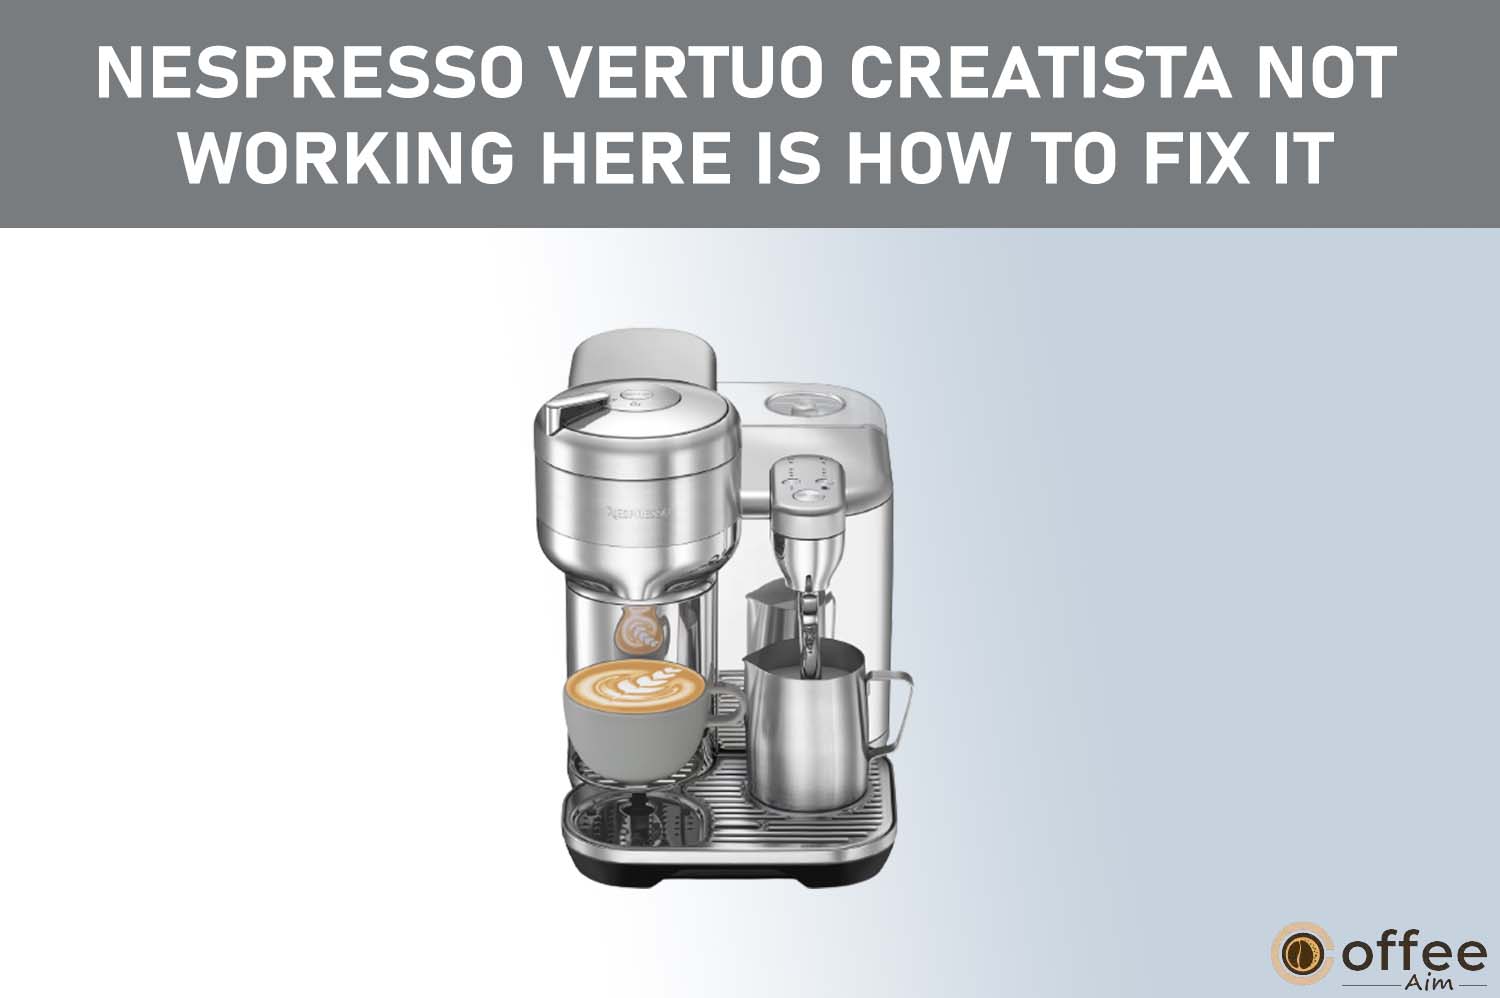 Featured image for the article "Nespresso Vertuo Creatista Not Working Here is How to Fix It"